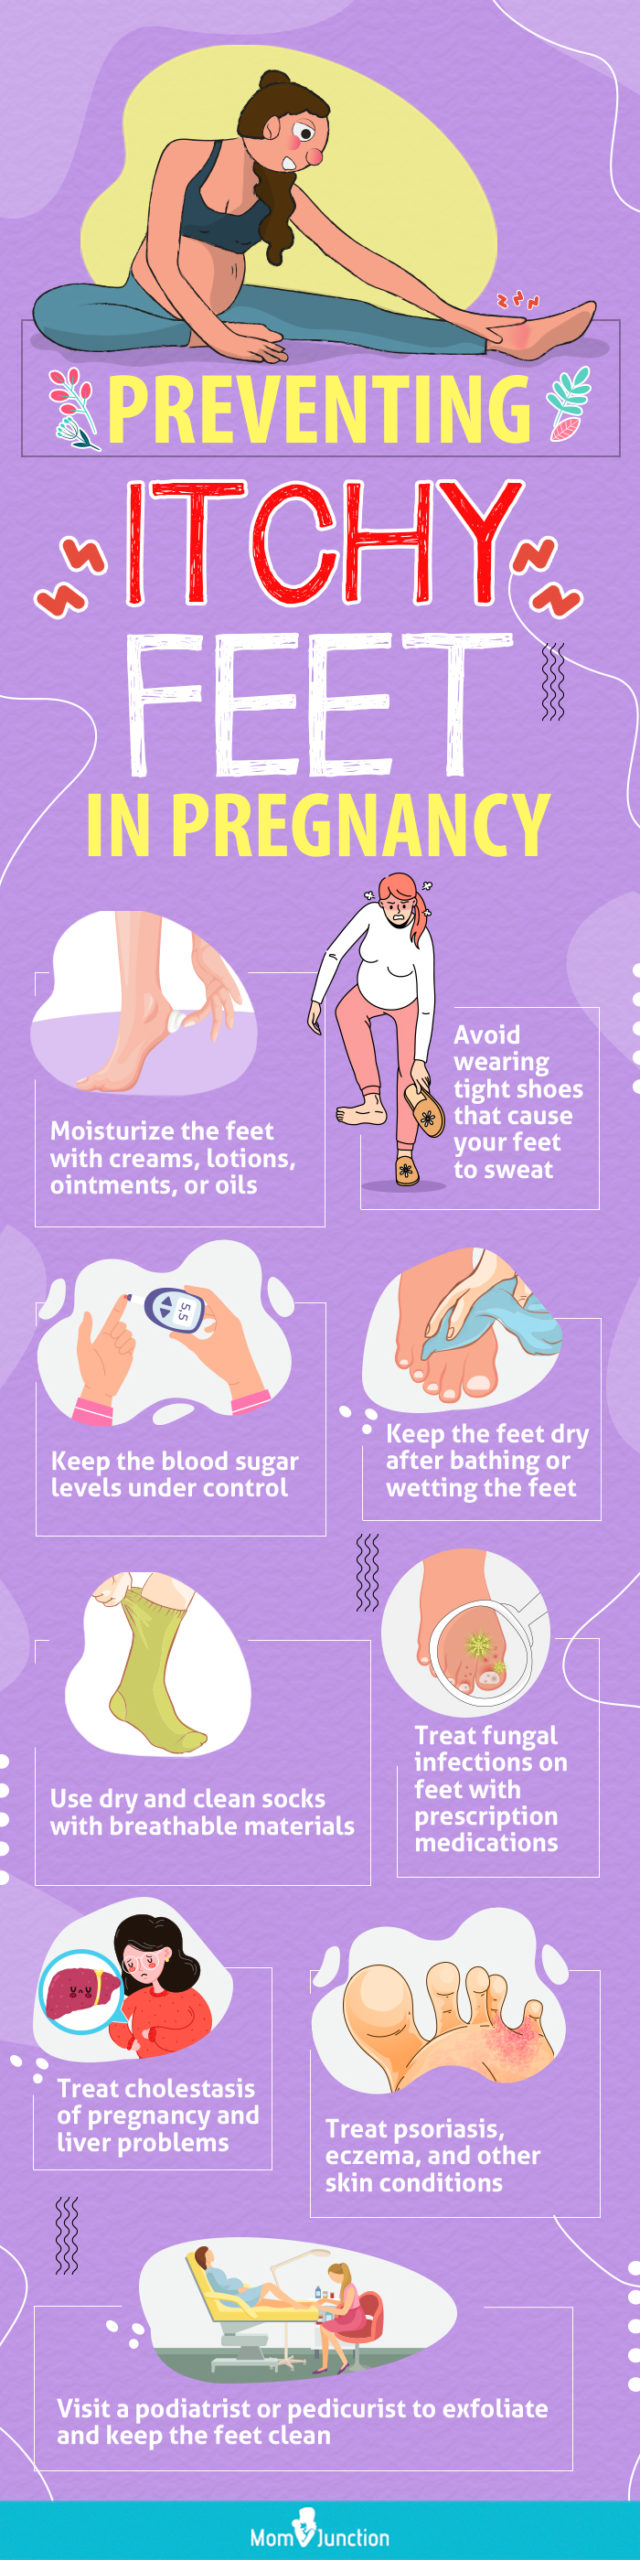 prevention of itchy feet in pregnancy [infographic]